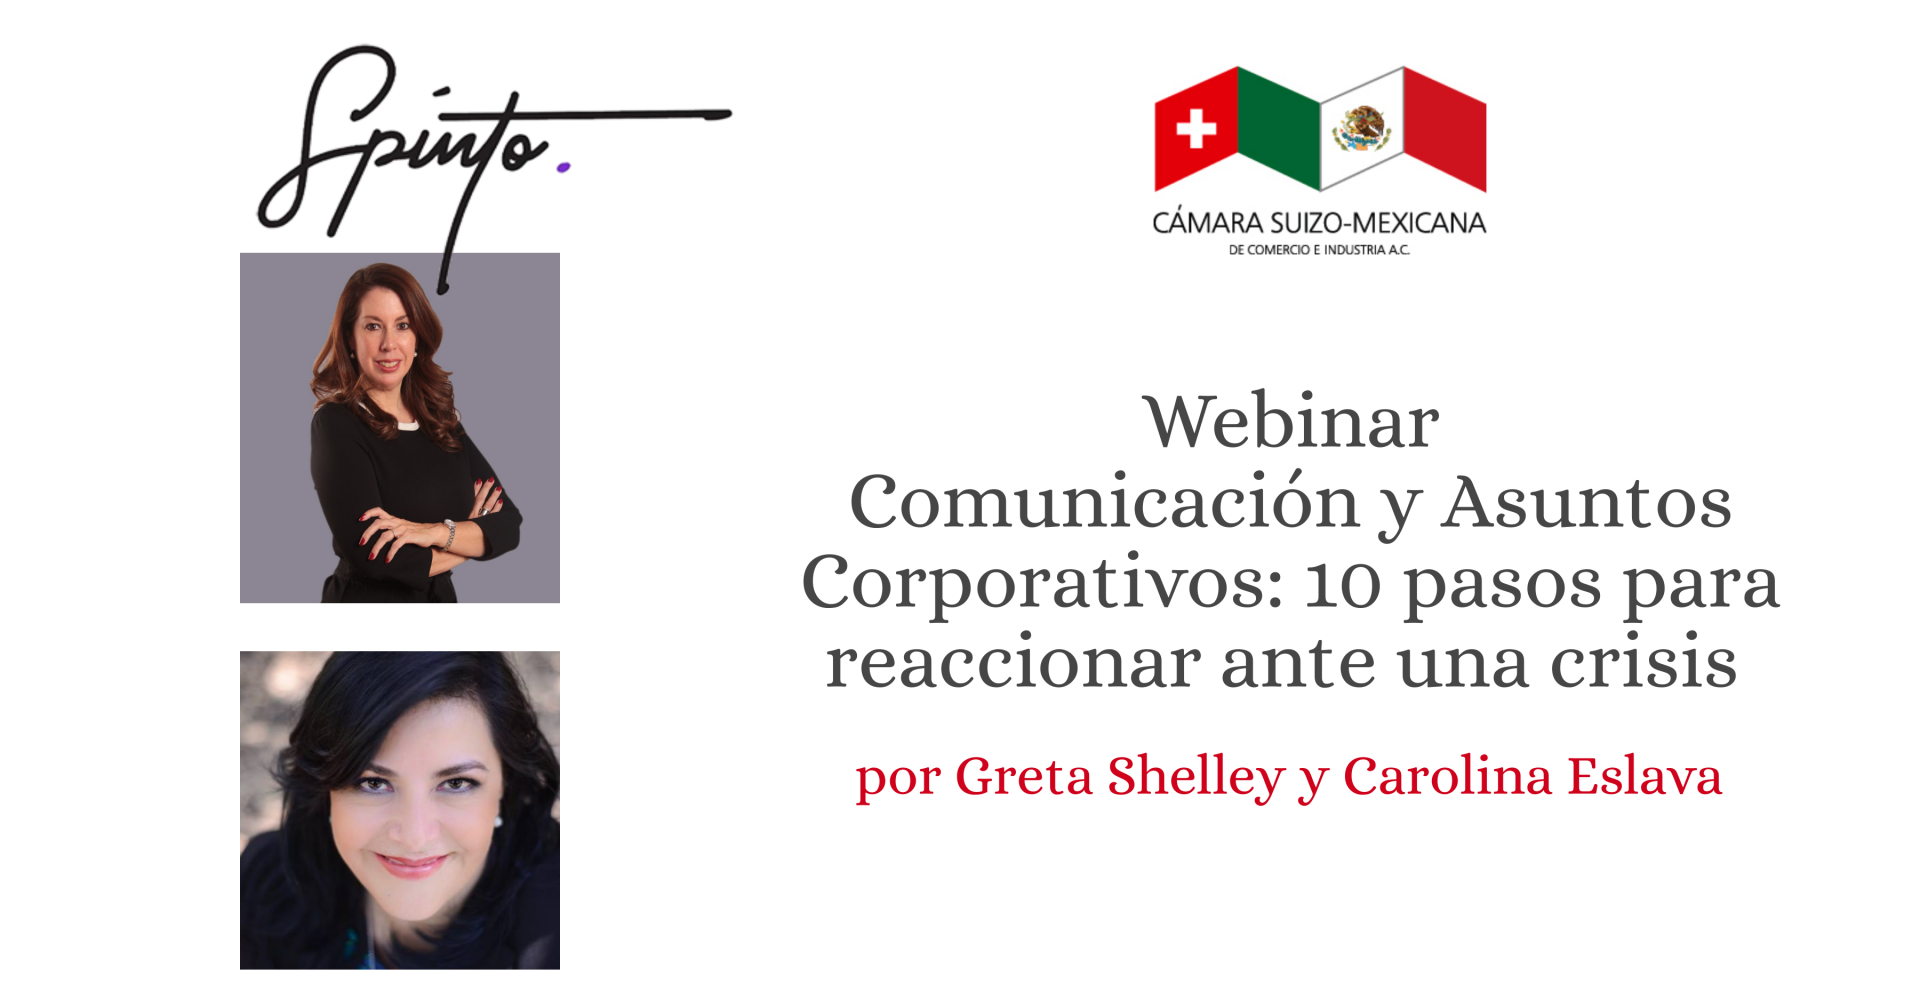 Webinar Communication and Corporate Affairs: 10 steps to react to a crisis